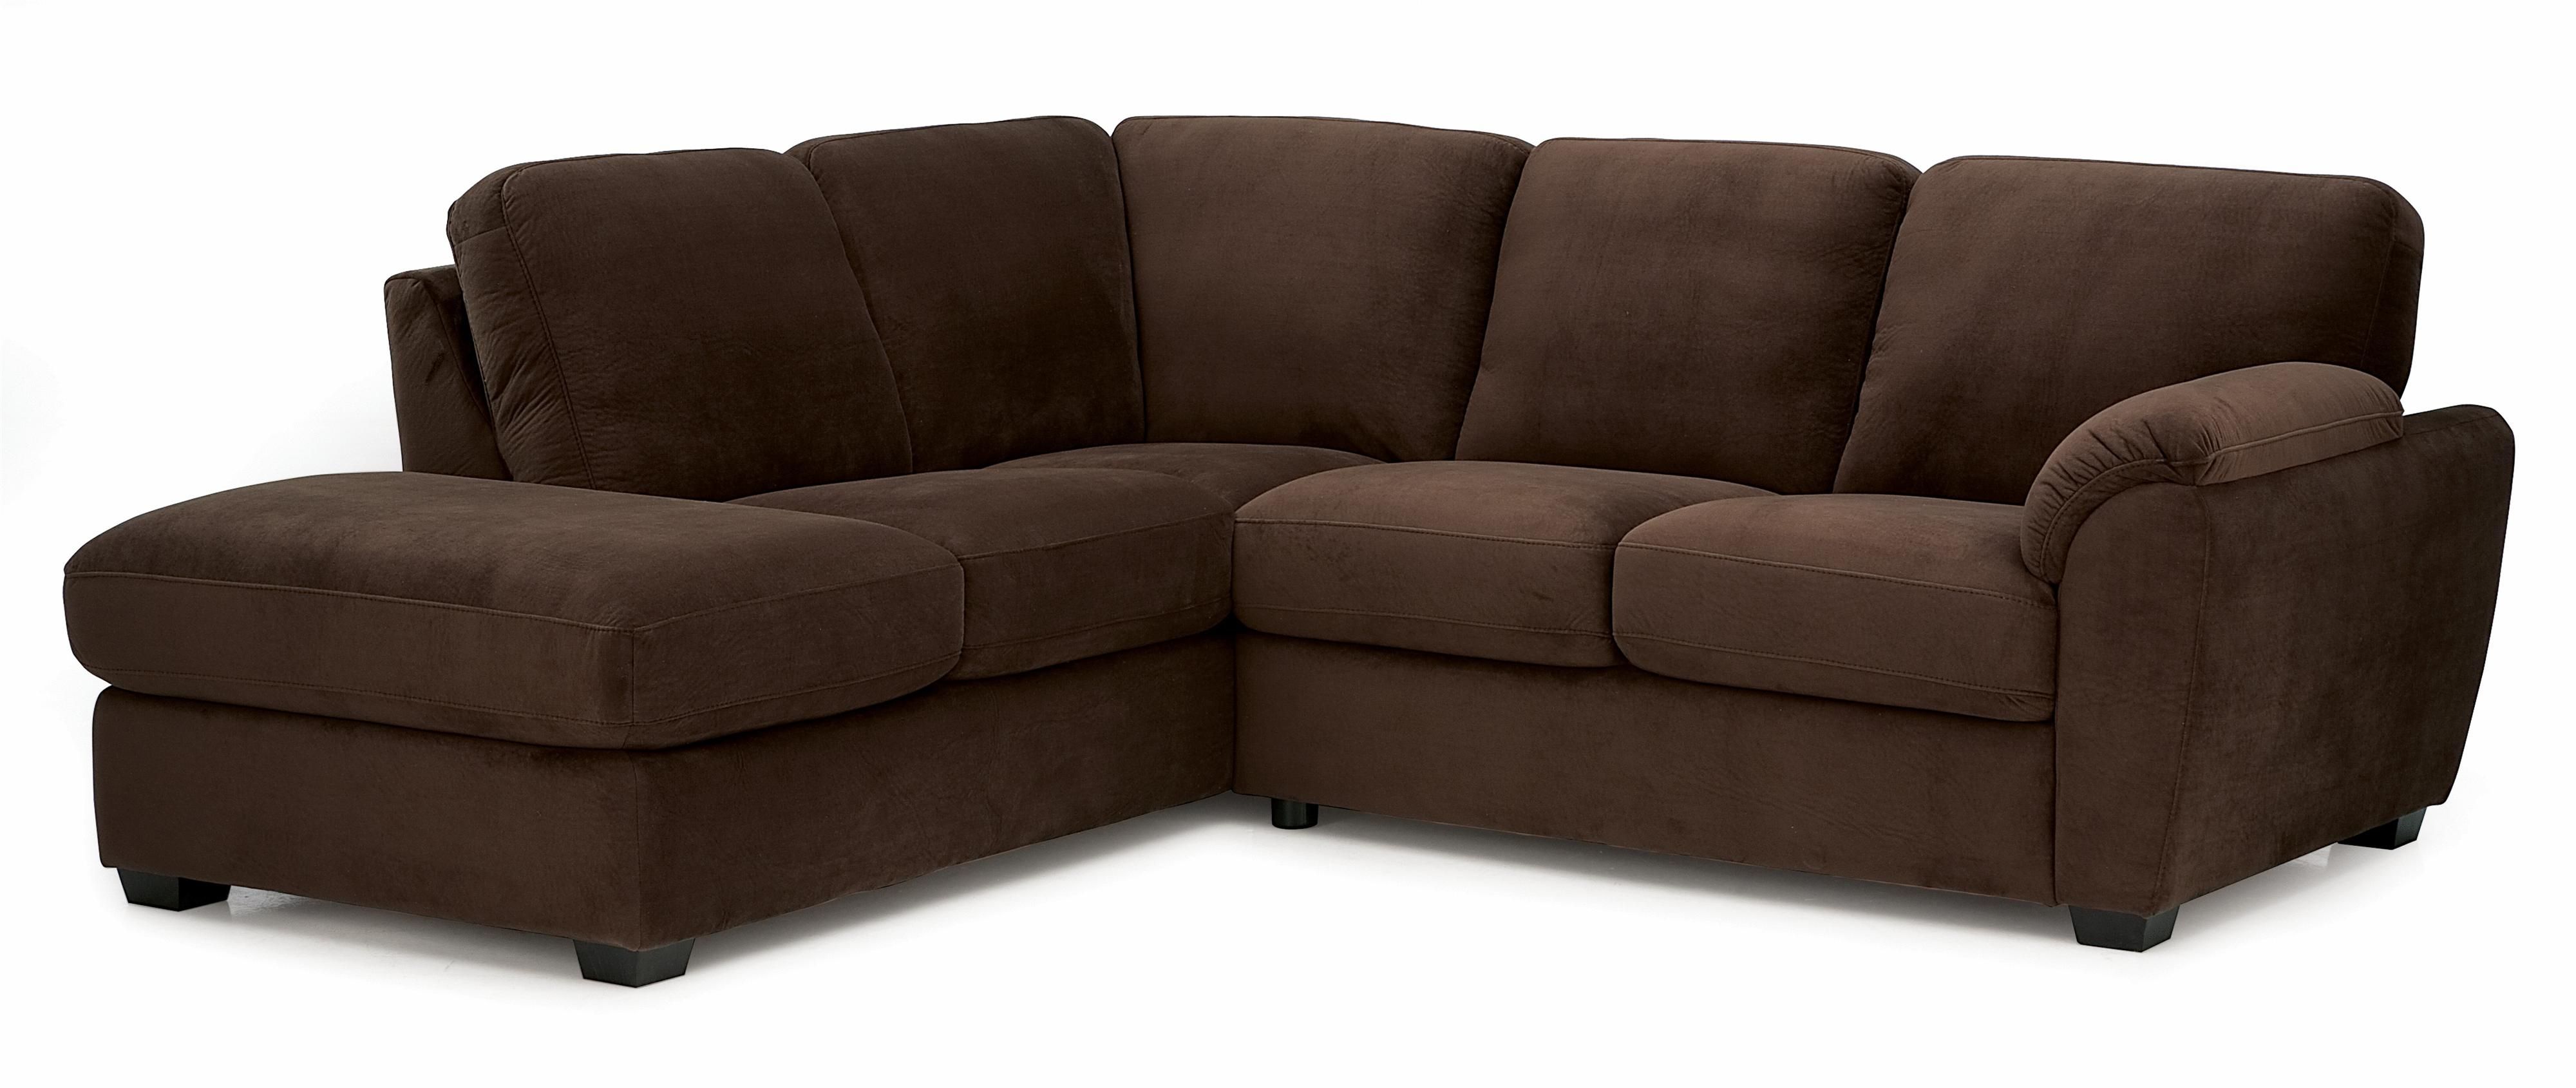 Lanza Two Piece Sectional Sofa With Rhf Chaisepalliser | Sofas Inside Newmarket Ontario Sectional Sofas (View 7 of 10)